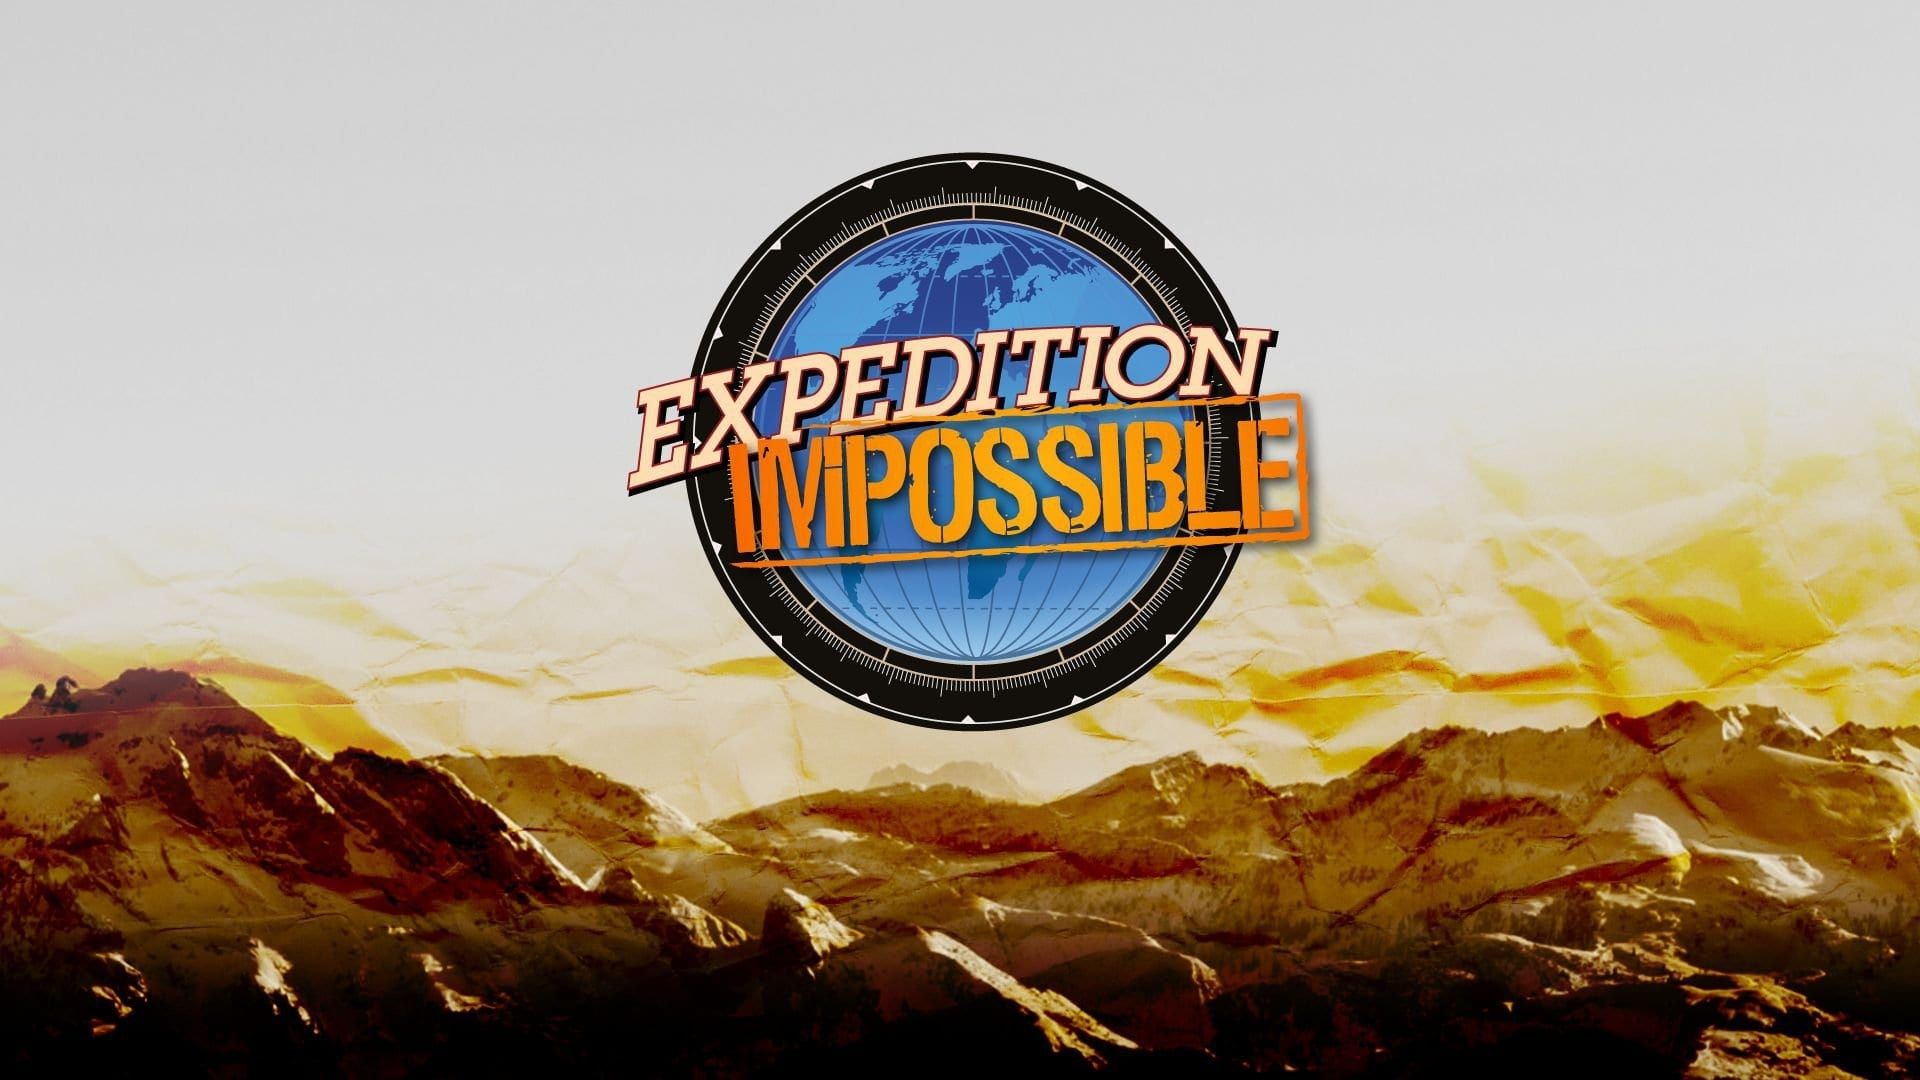 Expedition Impossible background